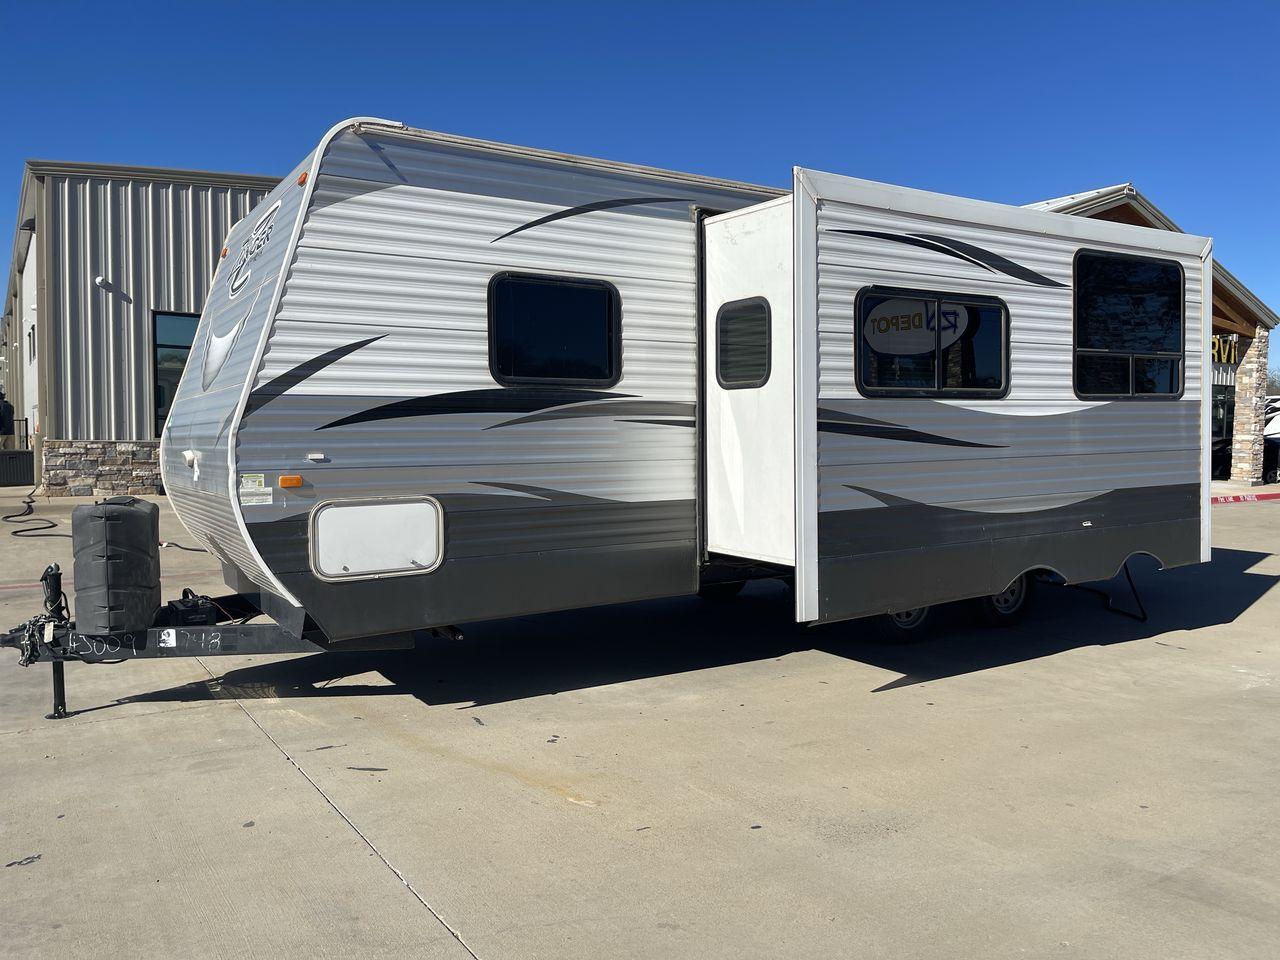 2017 WHITE CROSSROADS ZINGER 25RB (4V0TC2523HJ) , Length: 29.5 ft. | Dry Weight: 6,276 lbs. | Gross Weight: 7,870 lbs. | Slides: 1 transmission, located at 4319 N Main St, Cleburne, TX, 76033, (817) 678-5133, 32.385960, -97.391212 - The 2017 Crossroads Zinger 25RB is designed to elevate your camping adventures with exceptional comfort and versatility. Measuring 29.5 feet in length, this model ensures a spacious interior, accentuated by a single slide-out for enhanced roominess. It features a master bedroom that fits a queen-siz - Photo #21